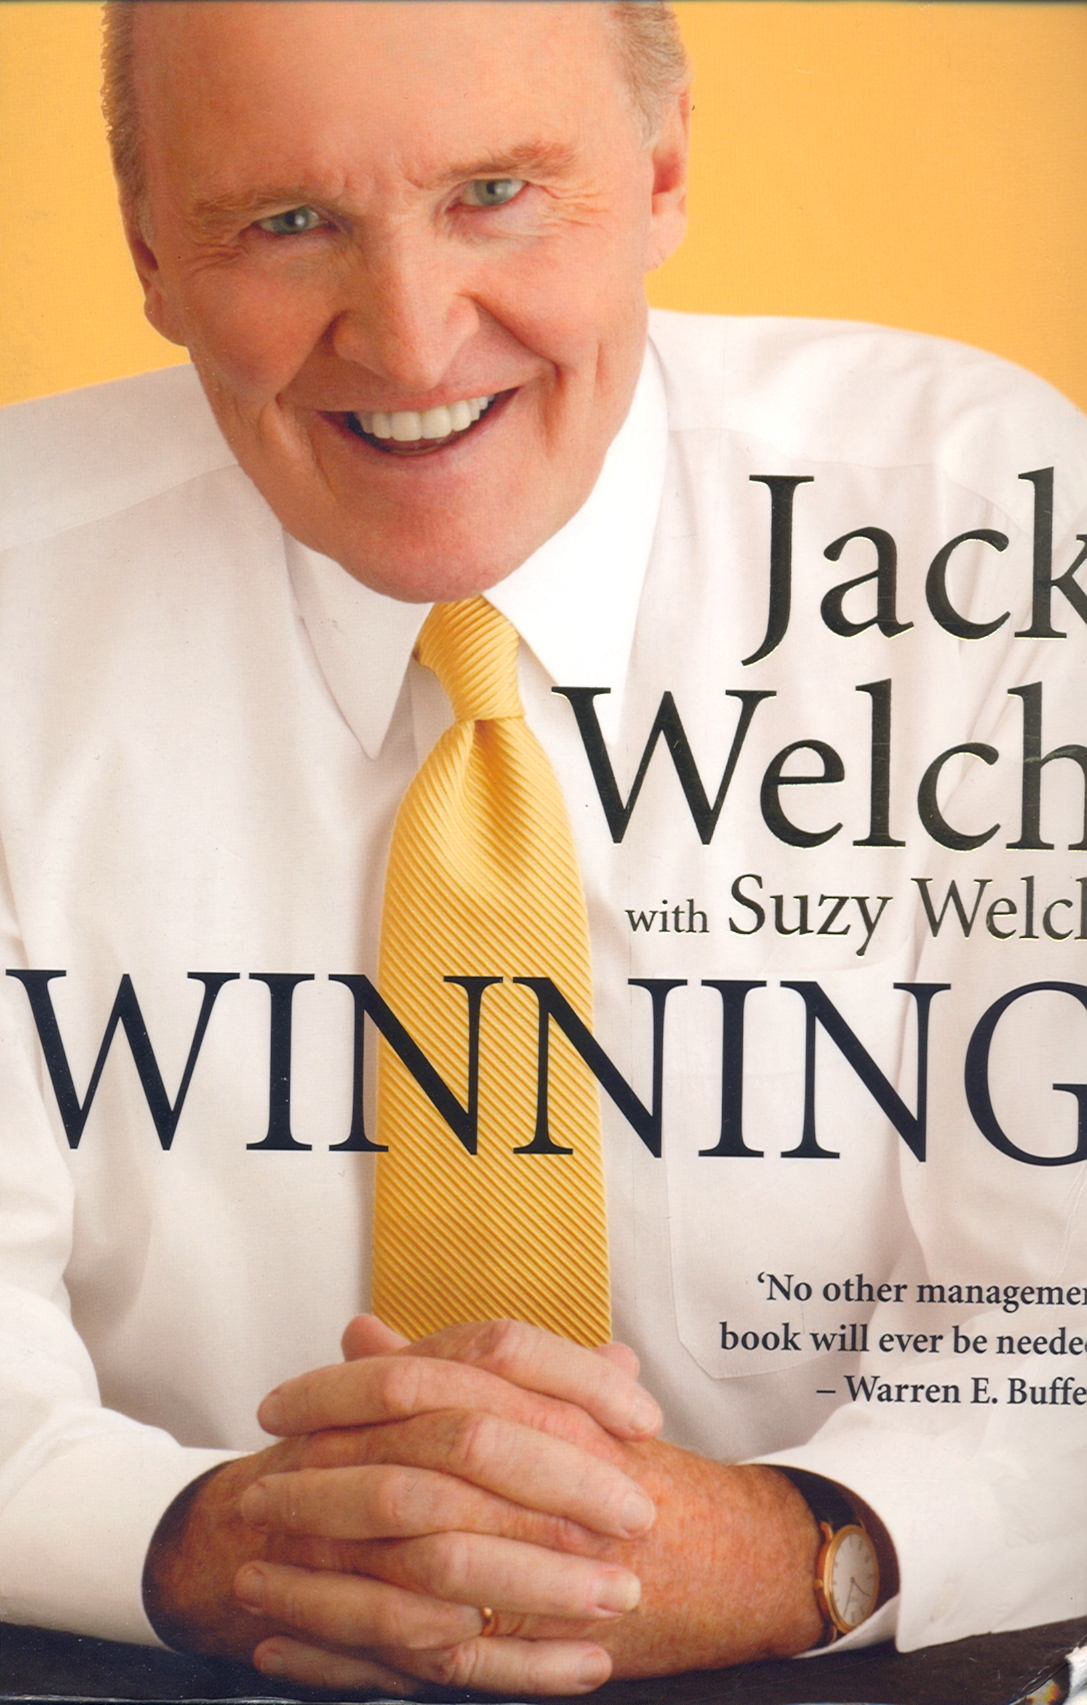 Title: Winning Author: Jack Welch - The Point